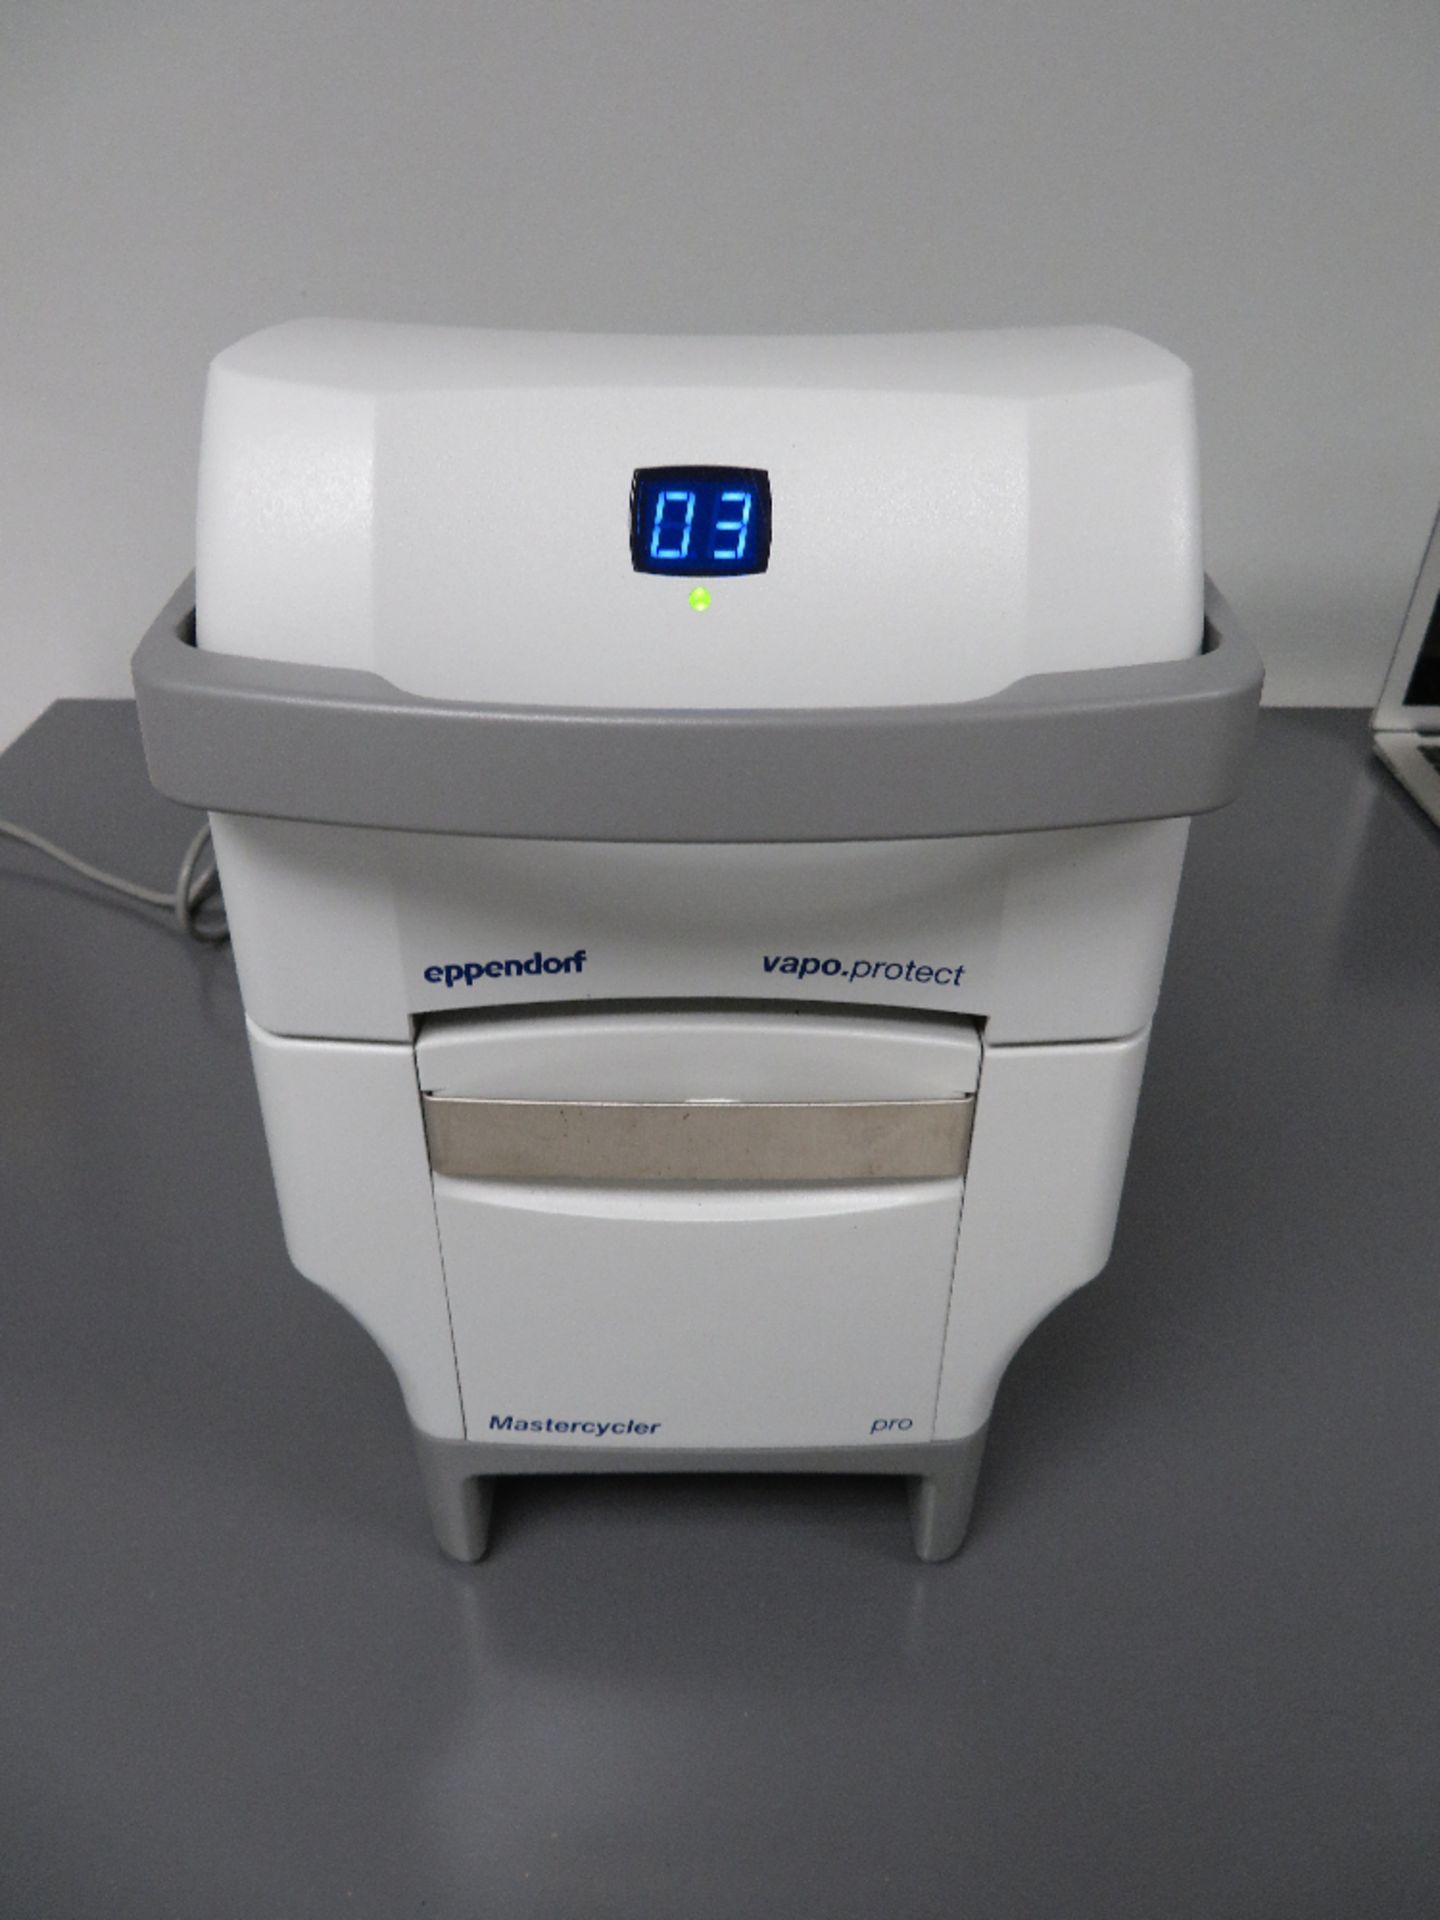 Eppendorf 6321 Mastercycler Pro New in Box - Image 2 of 3